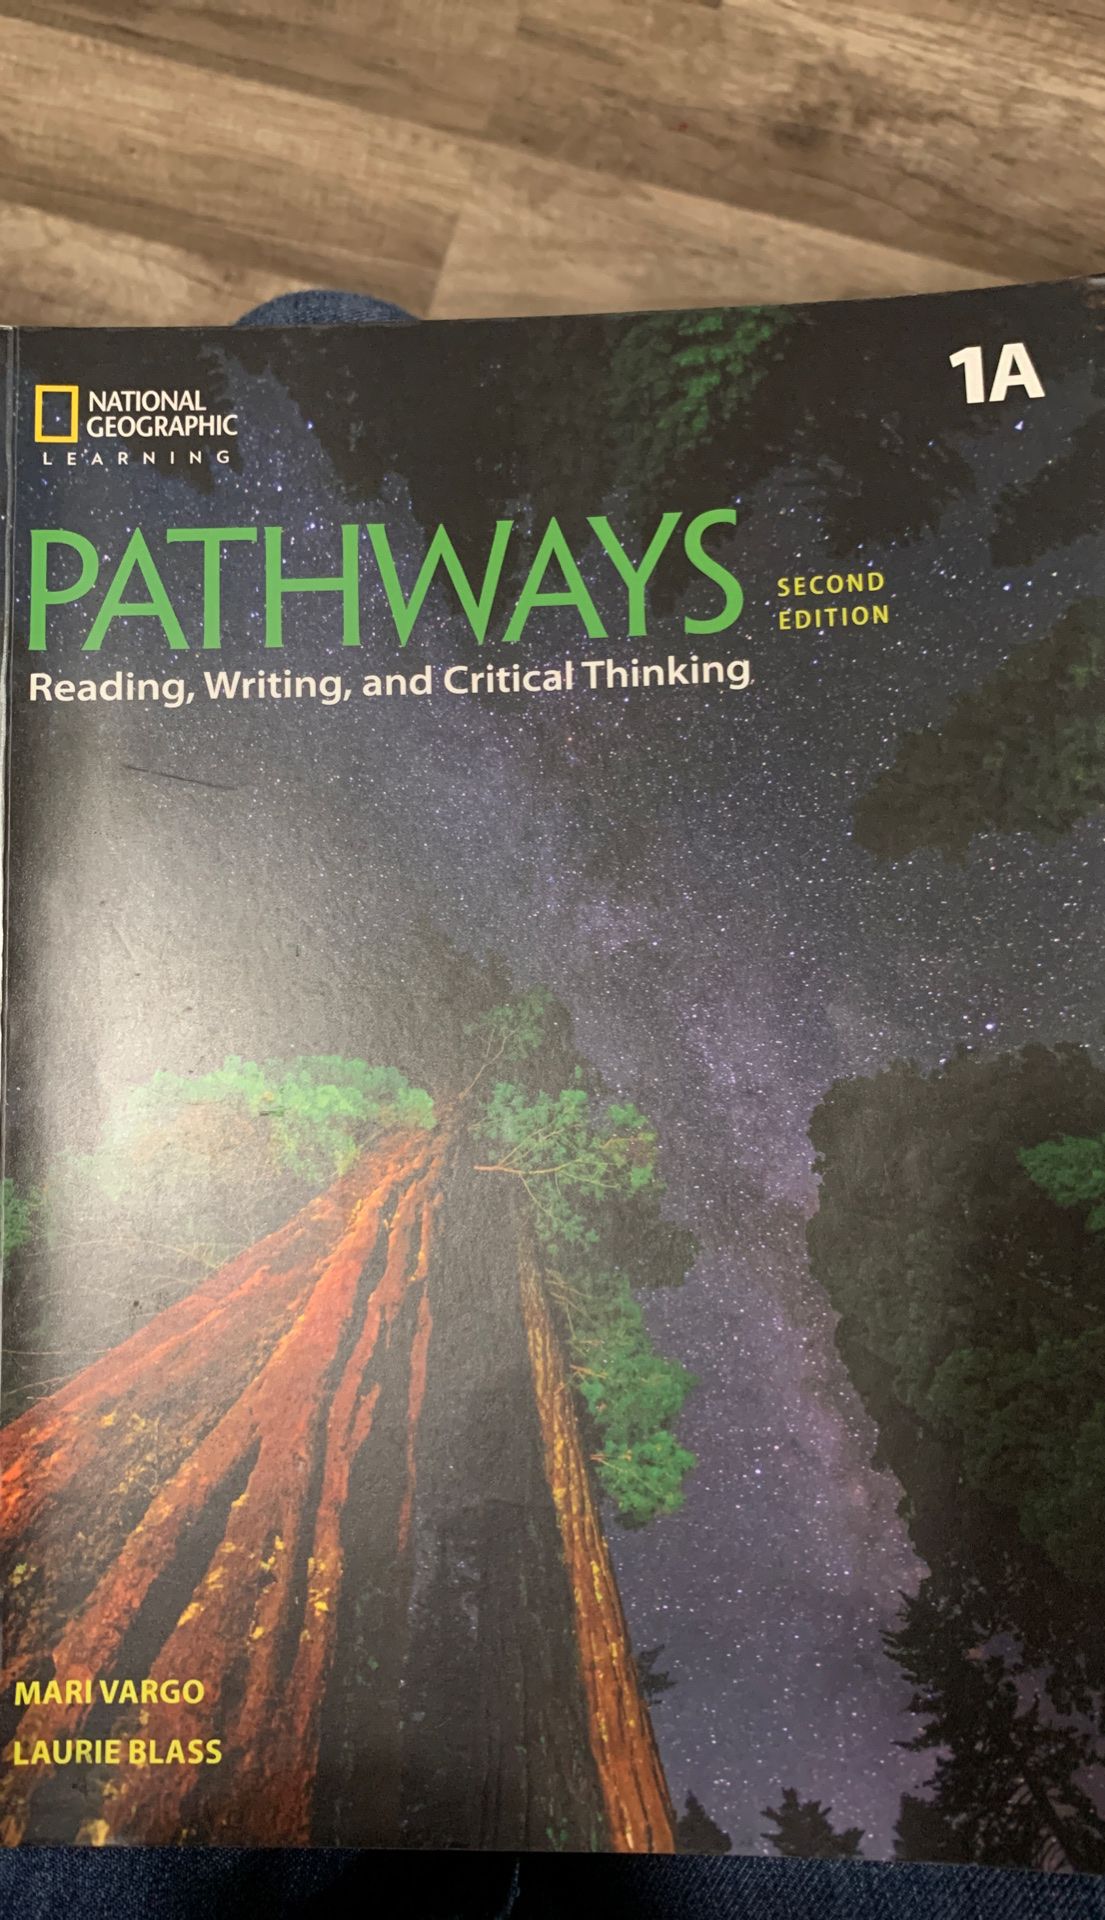 Pathways second edition 1A